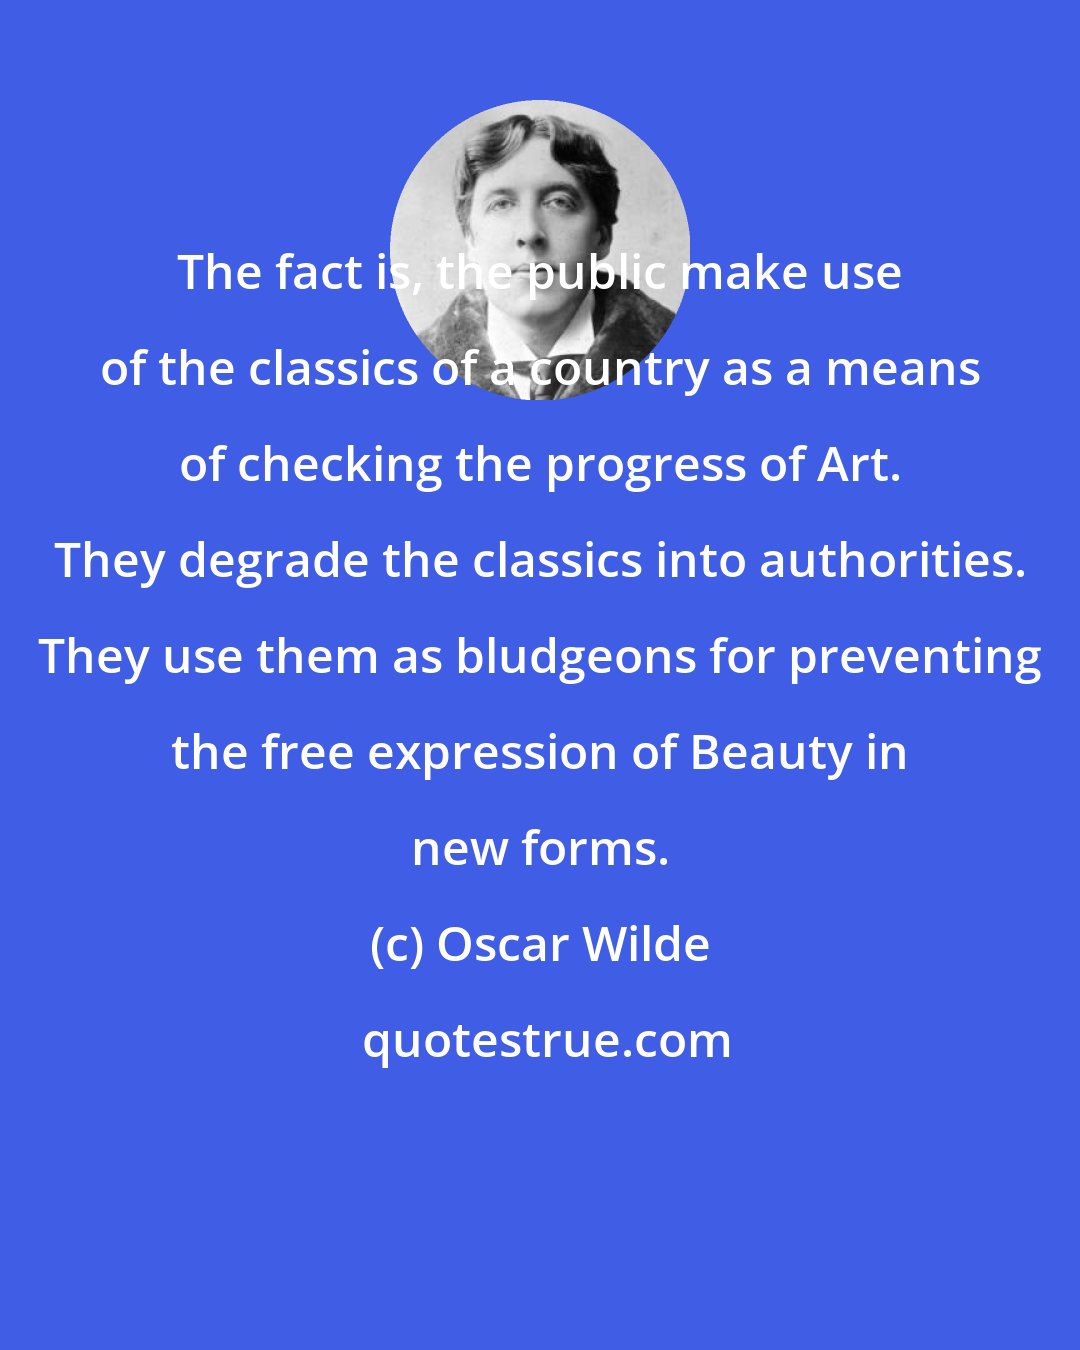 Oscar Wilde: The fact is, the public make use of the classics of a country as a means of checking the progress of Art. They degrade the classics into authorities. They use them as bludgeons for preventing the free expression of Beauty in new forms.